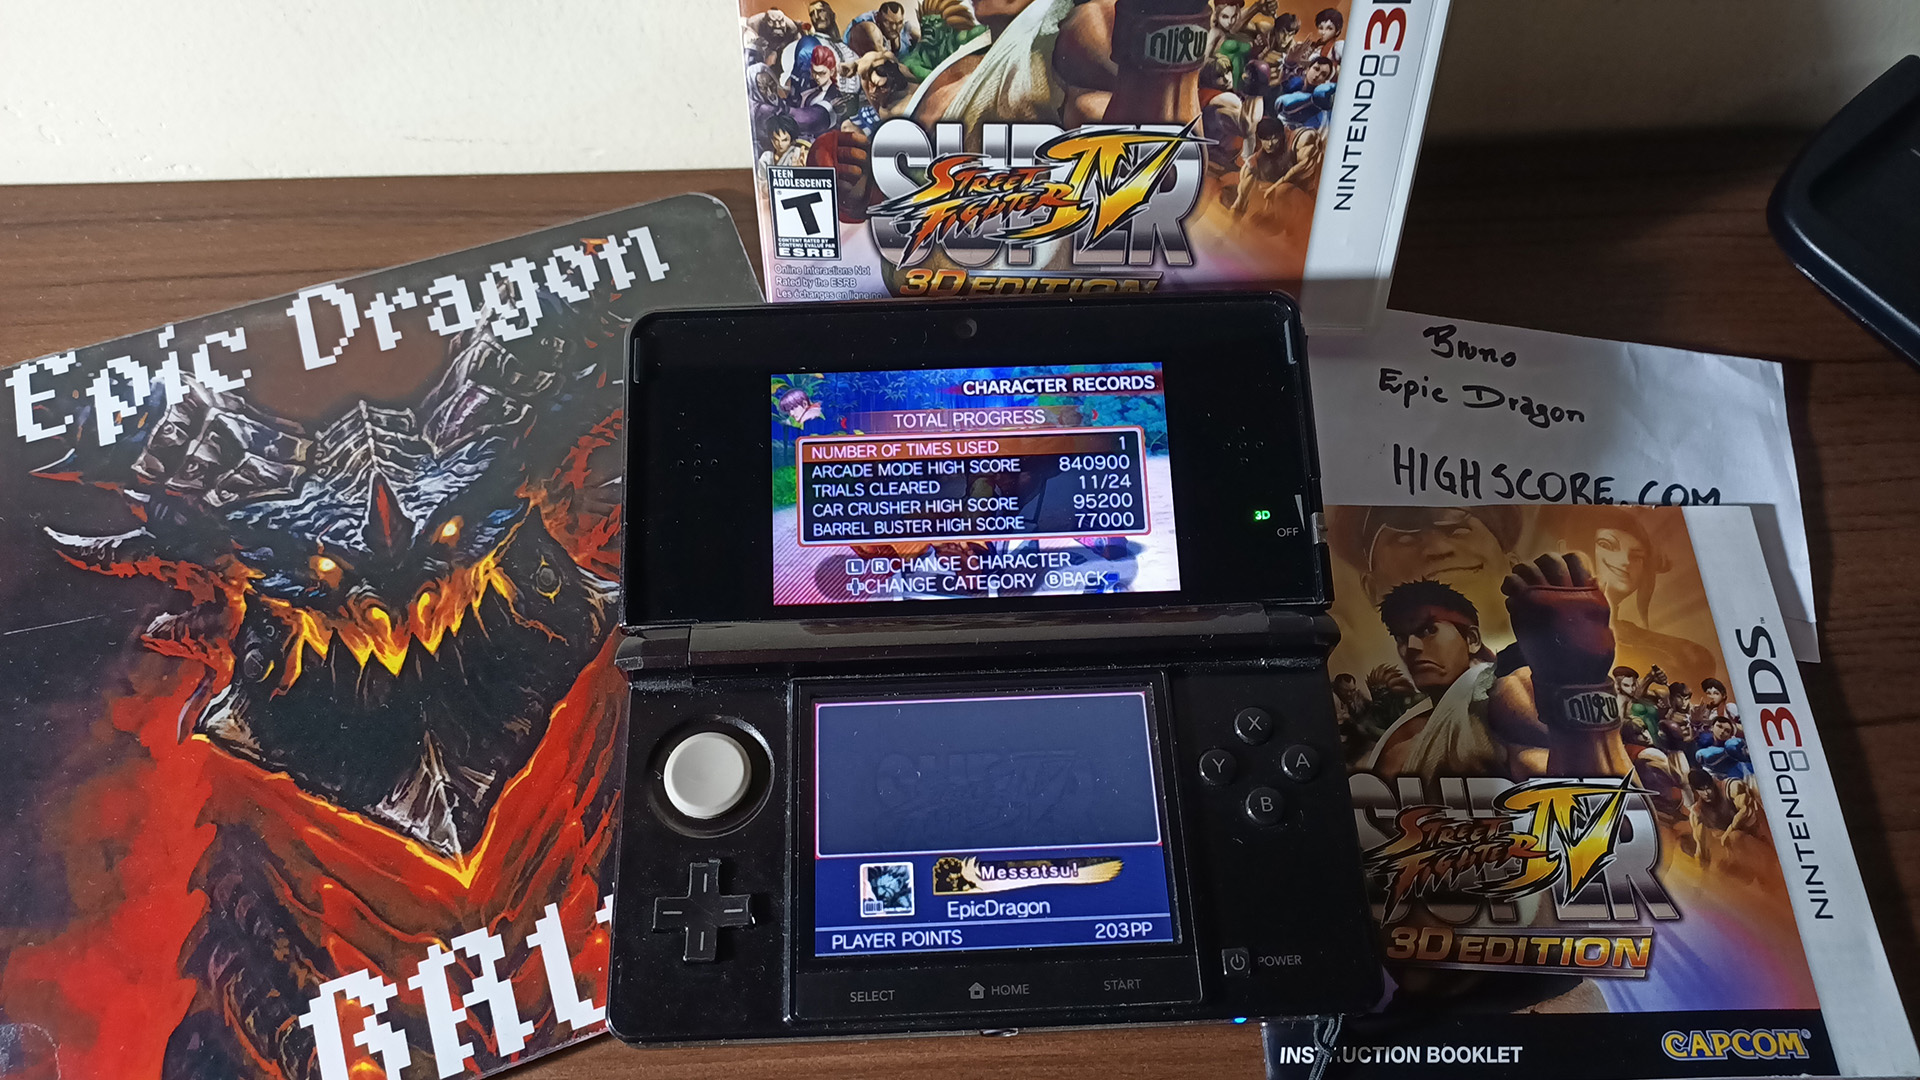 EpicDragon: Super Street Fighter IV 3D Edition: Challenge: Car Crusher: Guy (Nintendo 3DS) 95,200 points on 2022-08-05 17:57:47